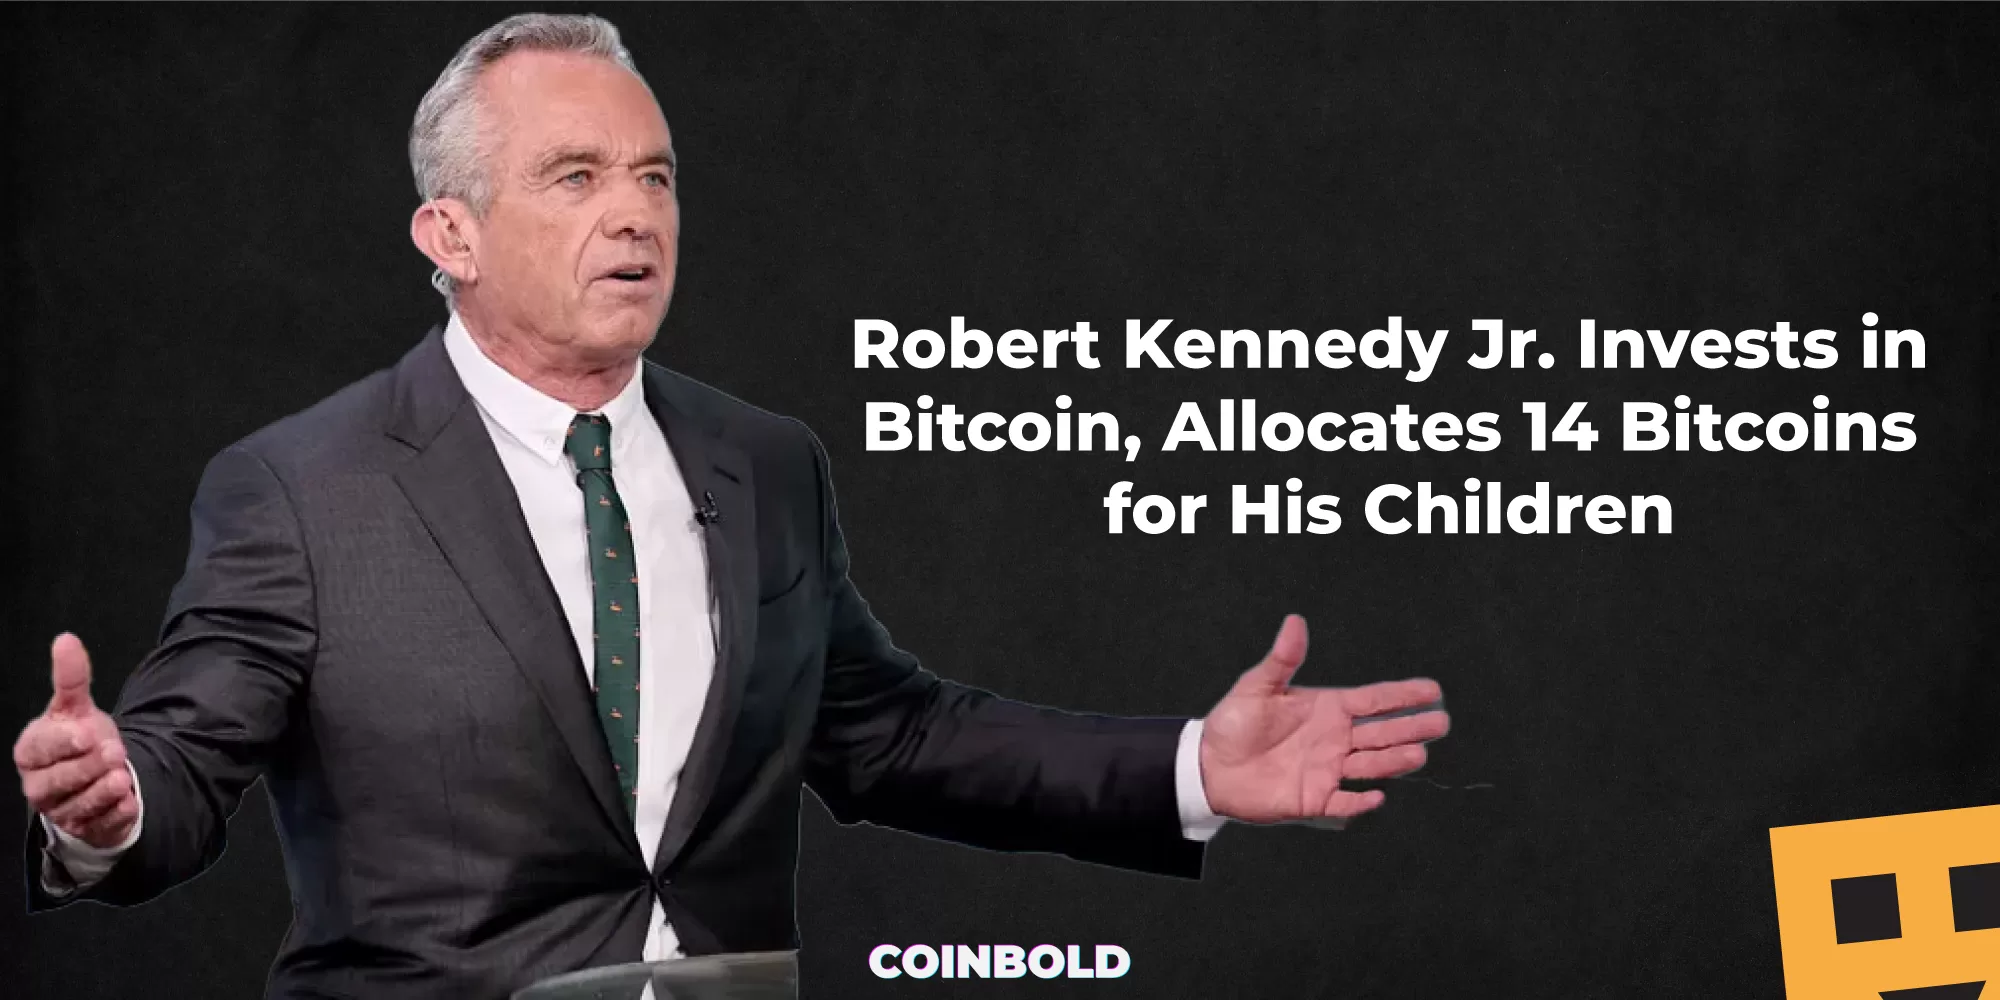 Robert Kennedy Jr. Invests in Bitcoin, Allocates 14 Bitcoins for His Children